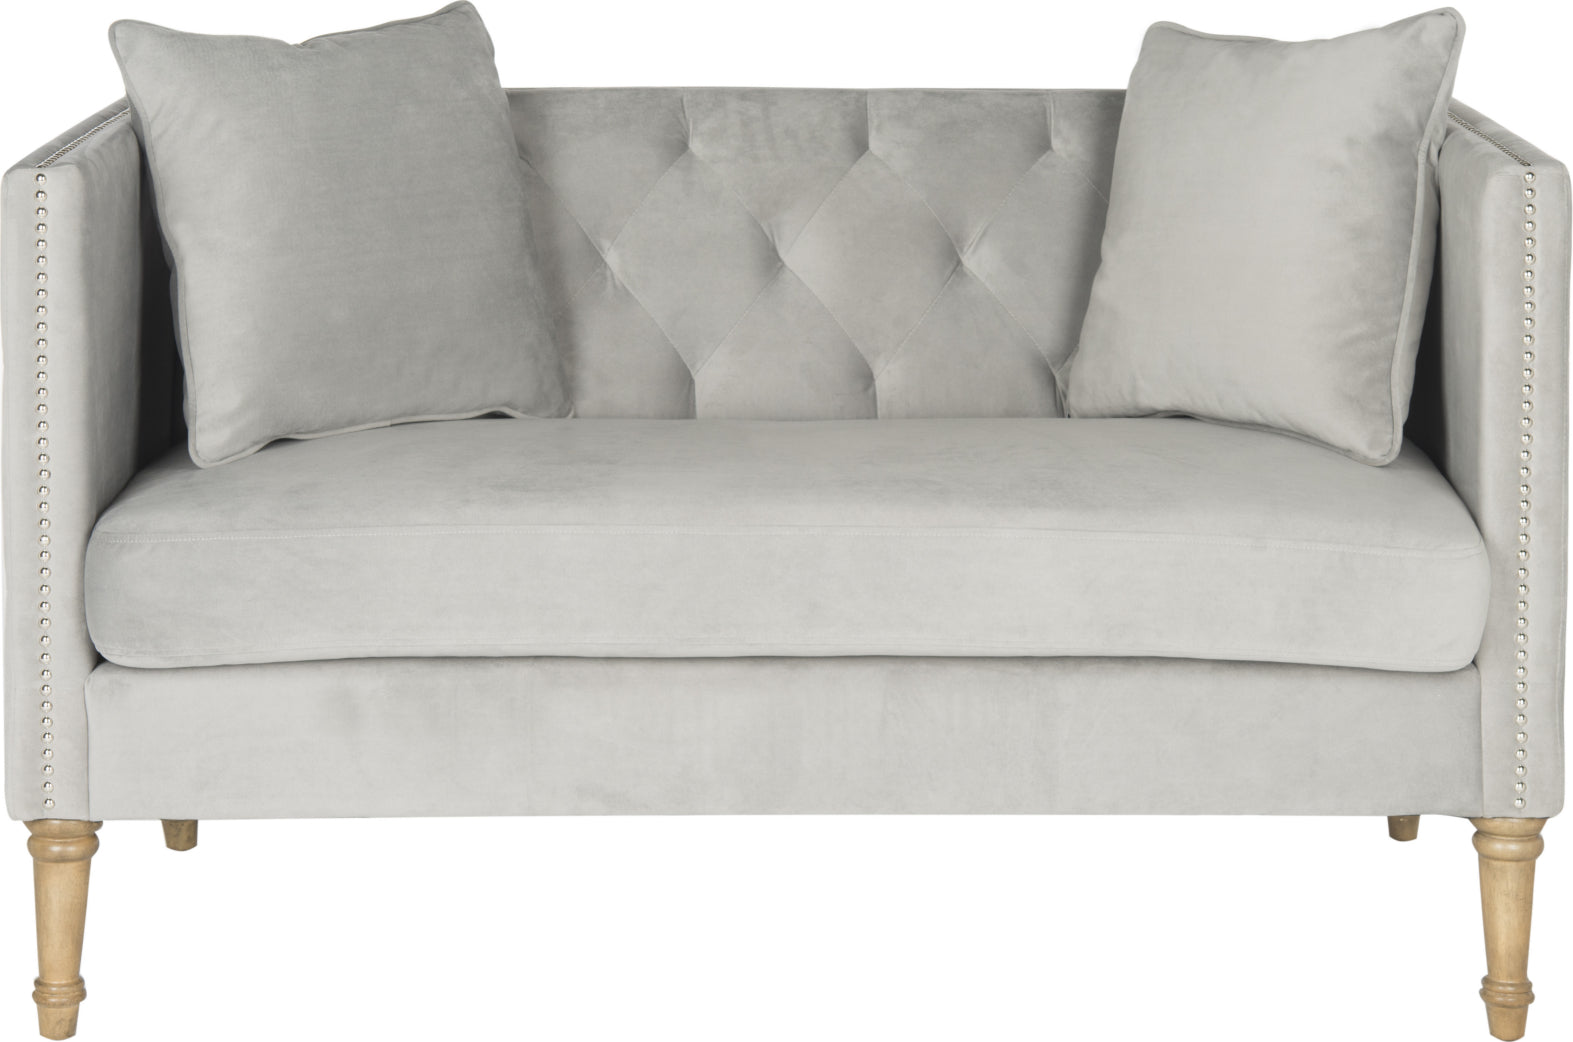 Safavieh Sarah Tufted Settee With Pillows Grey and Washed Oak Furniture main image